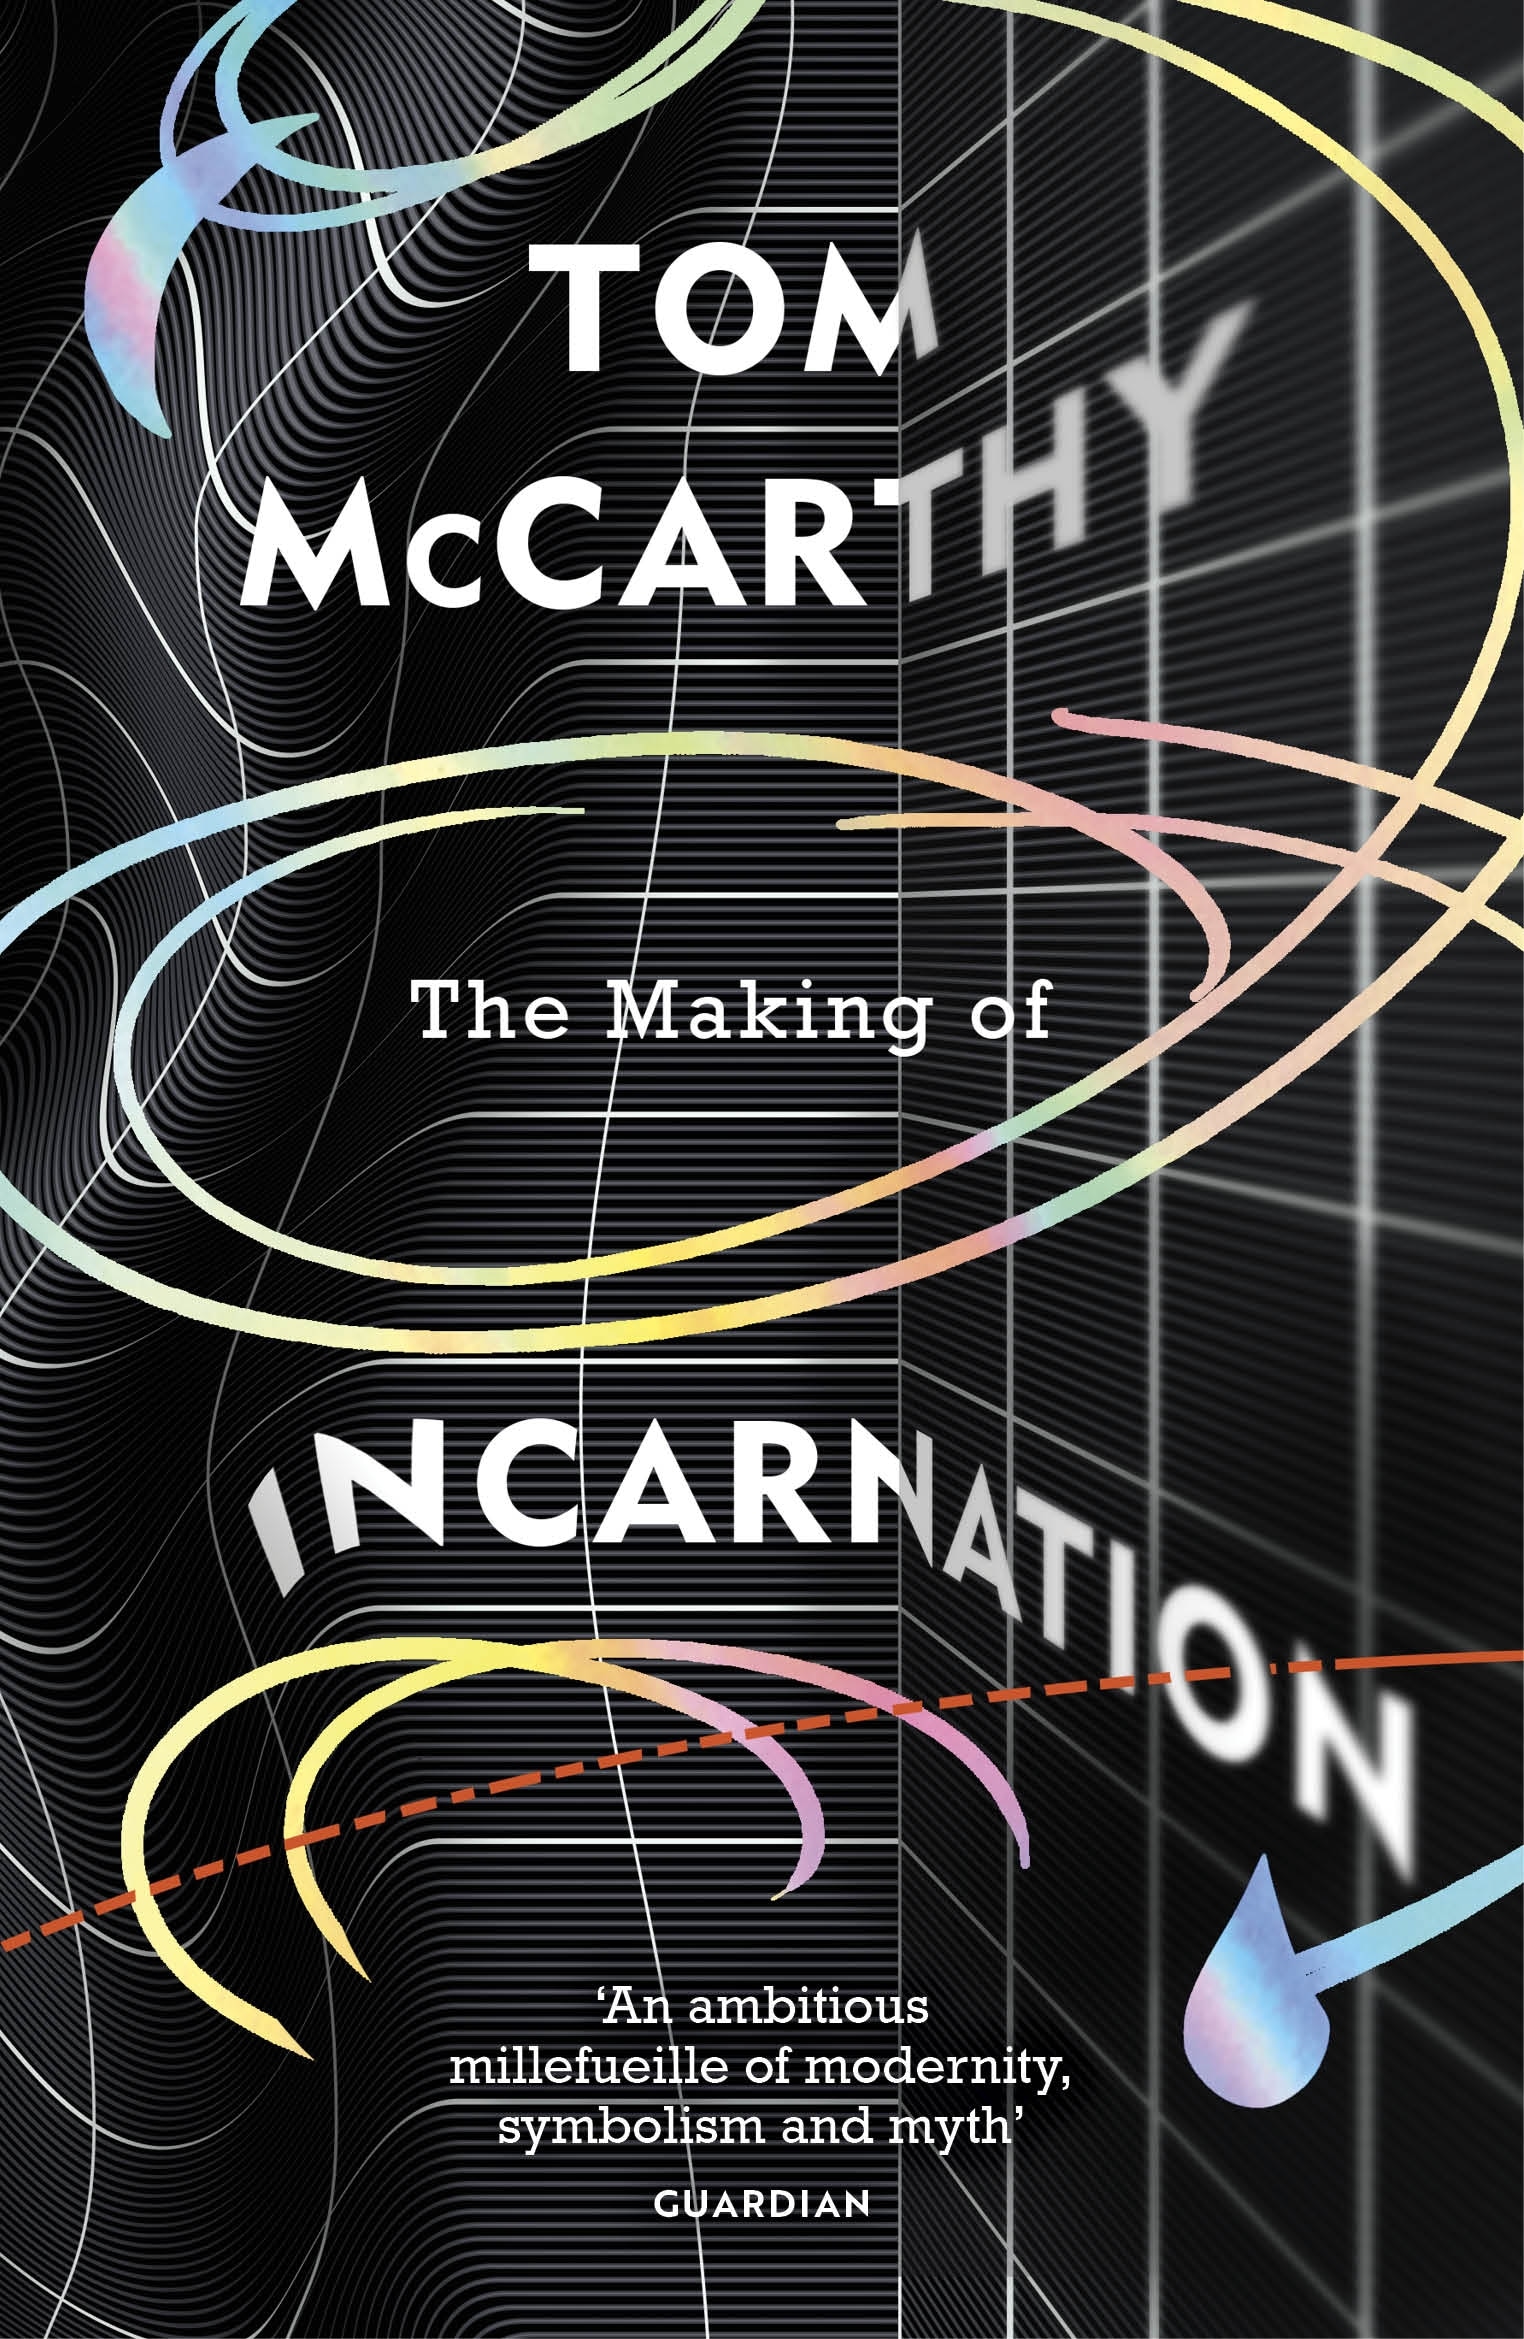 Book “The Making of Incarnation” by Tom McCarthy — September 15, 2022